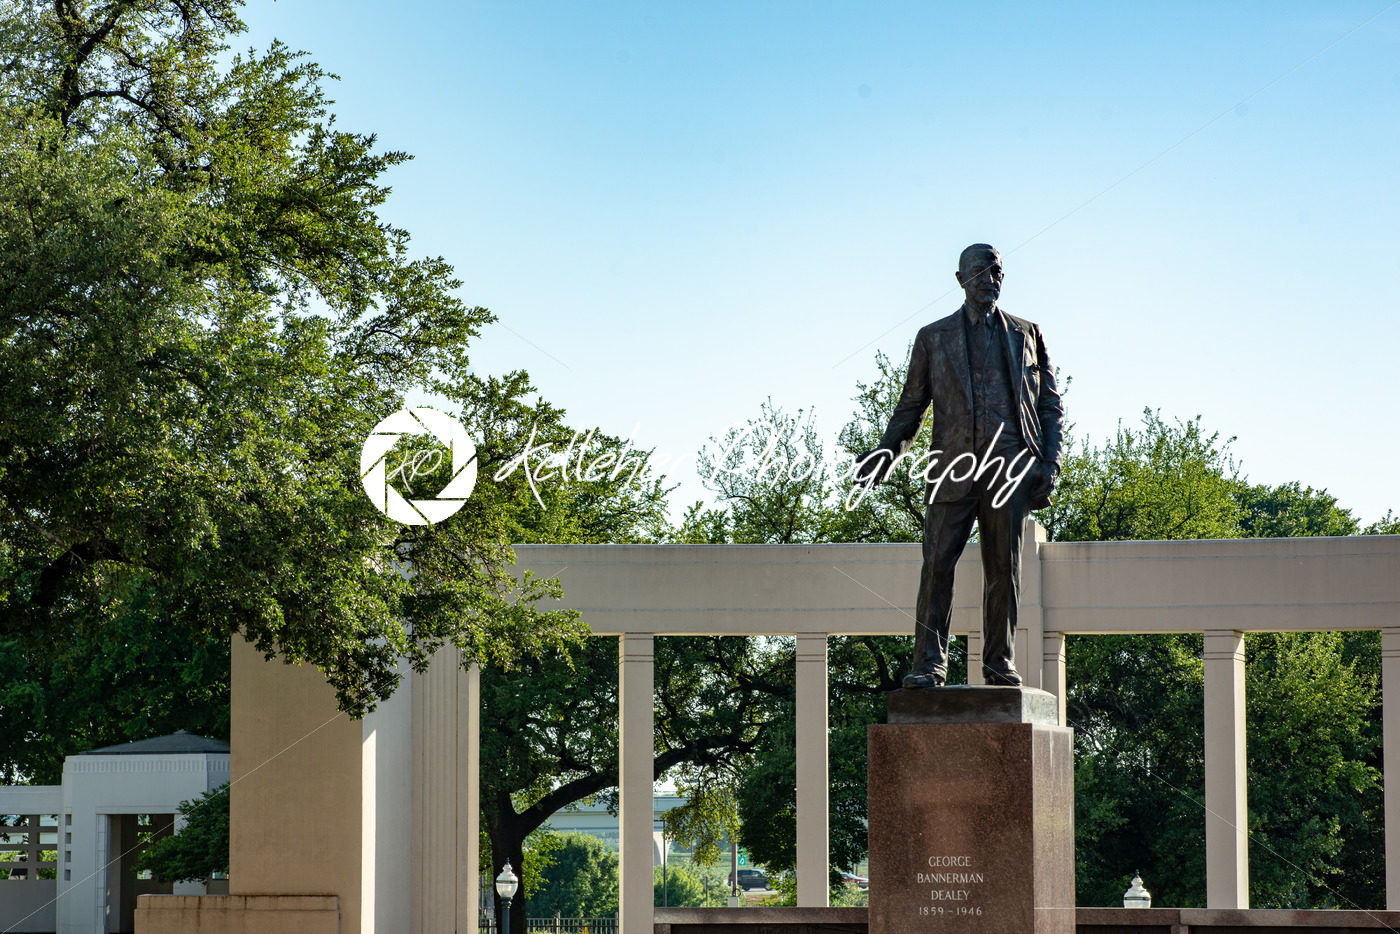 Dallas, Texas – May 7, 2018: George Bannerman Dealey Monument in Dealey Plaza, Dallas, Texas - Kelleher Photography Store